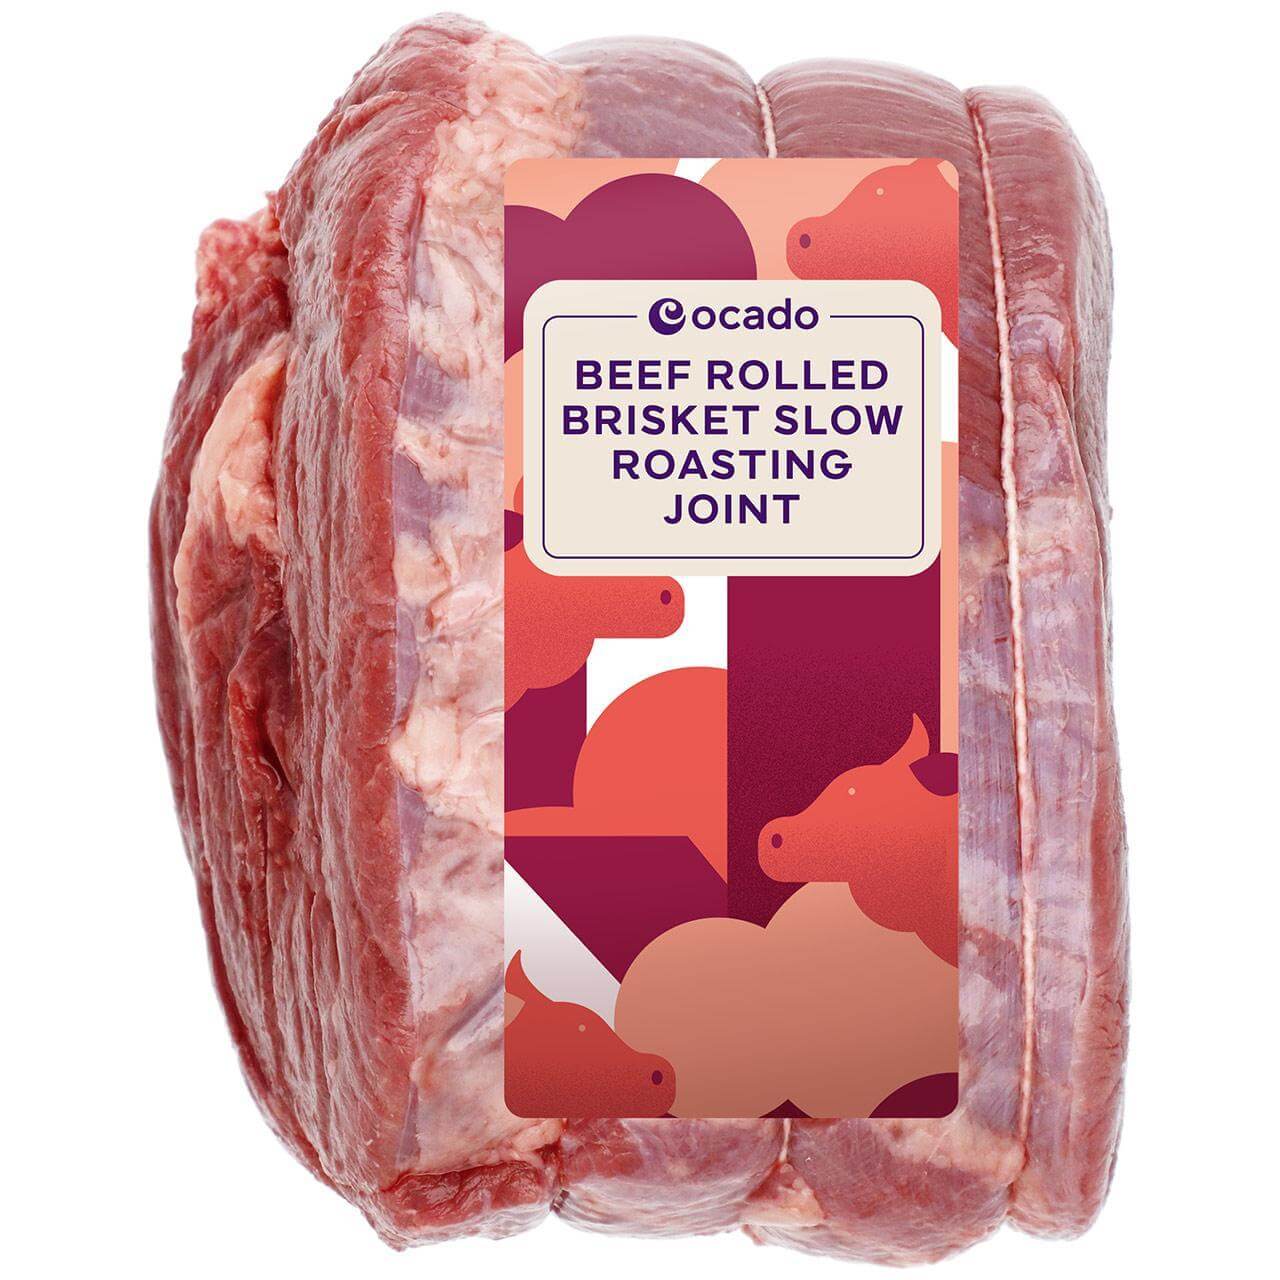 Image of Beef Rolled Brisket Slow Roasting Joint by Ocado, designed, produced or made in the UK. Buying this product supports a UK business, jobs and the local community.